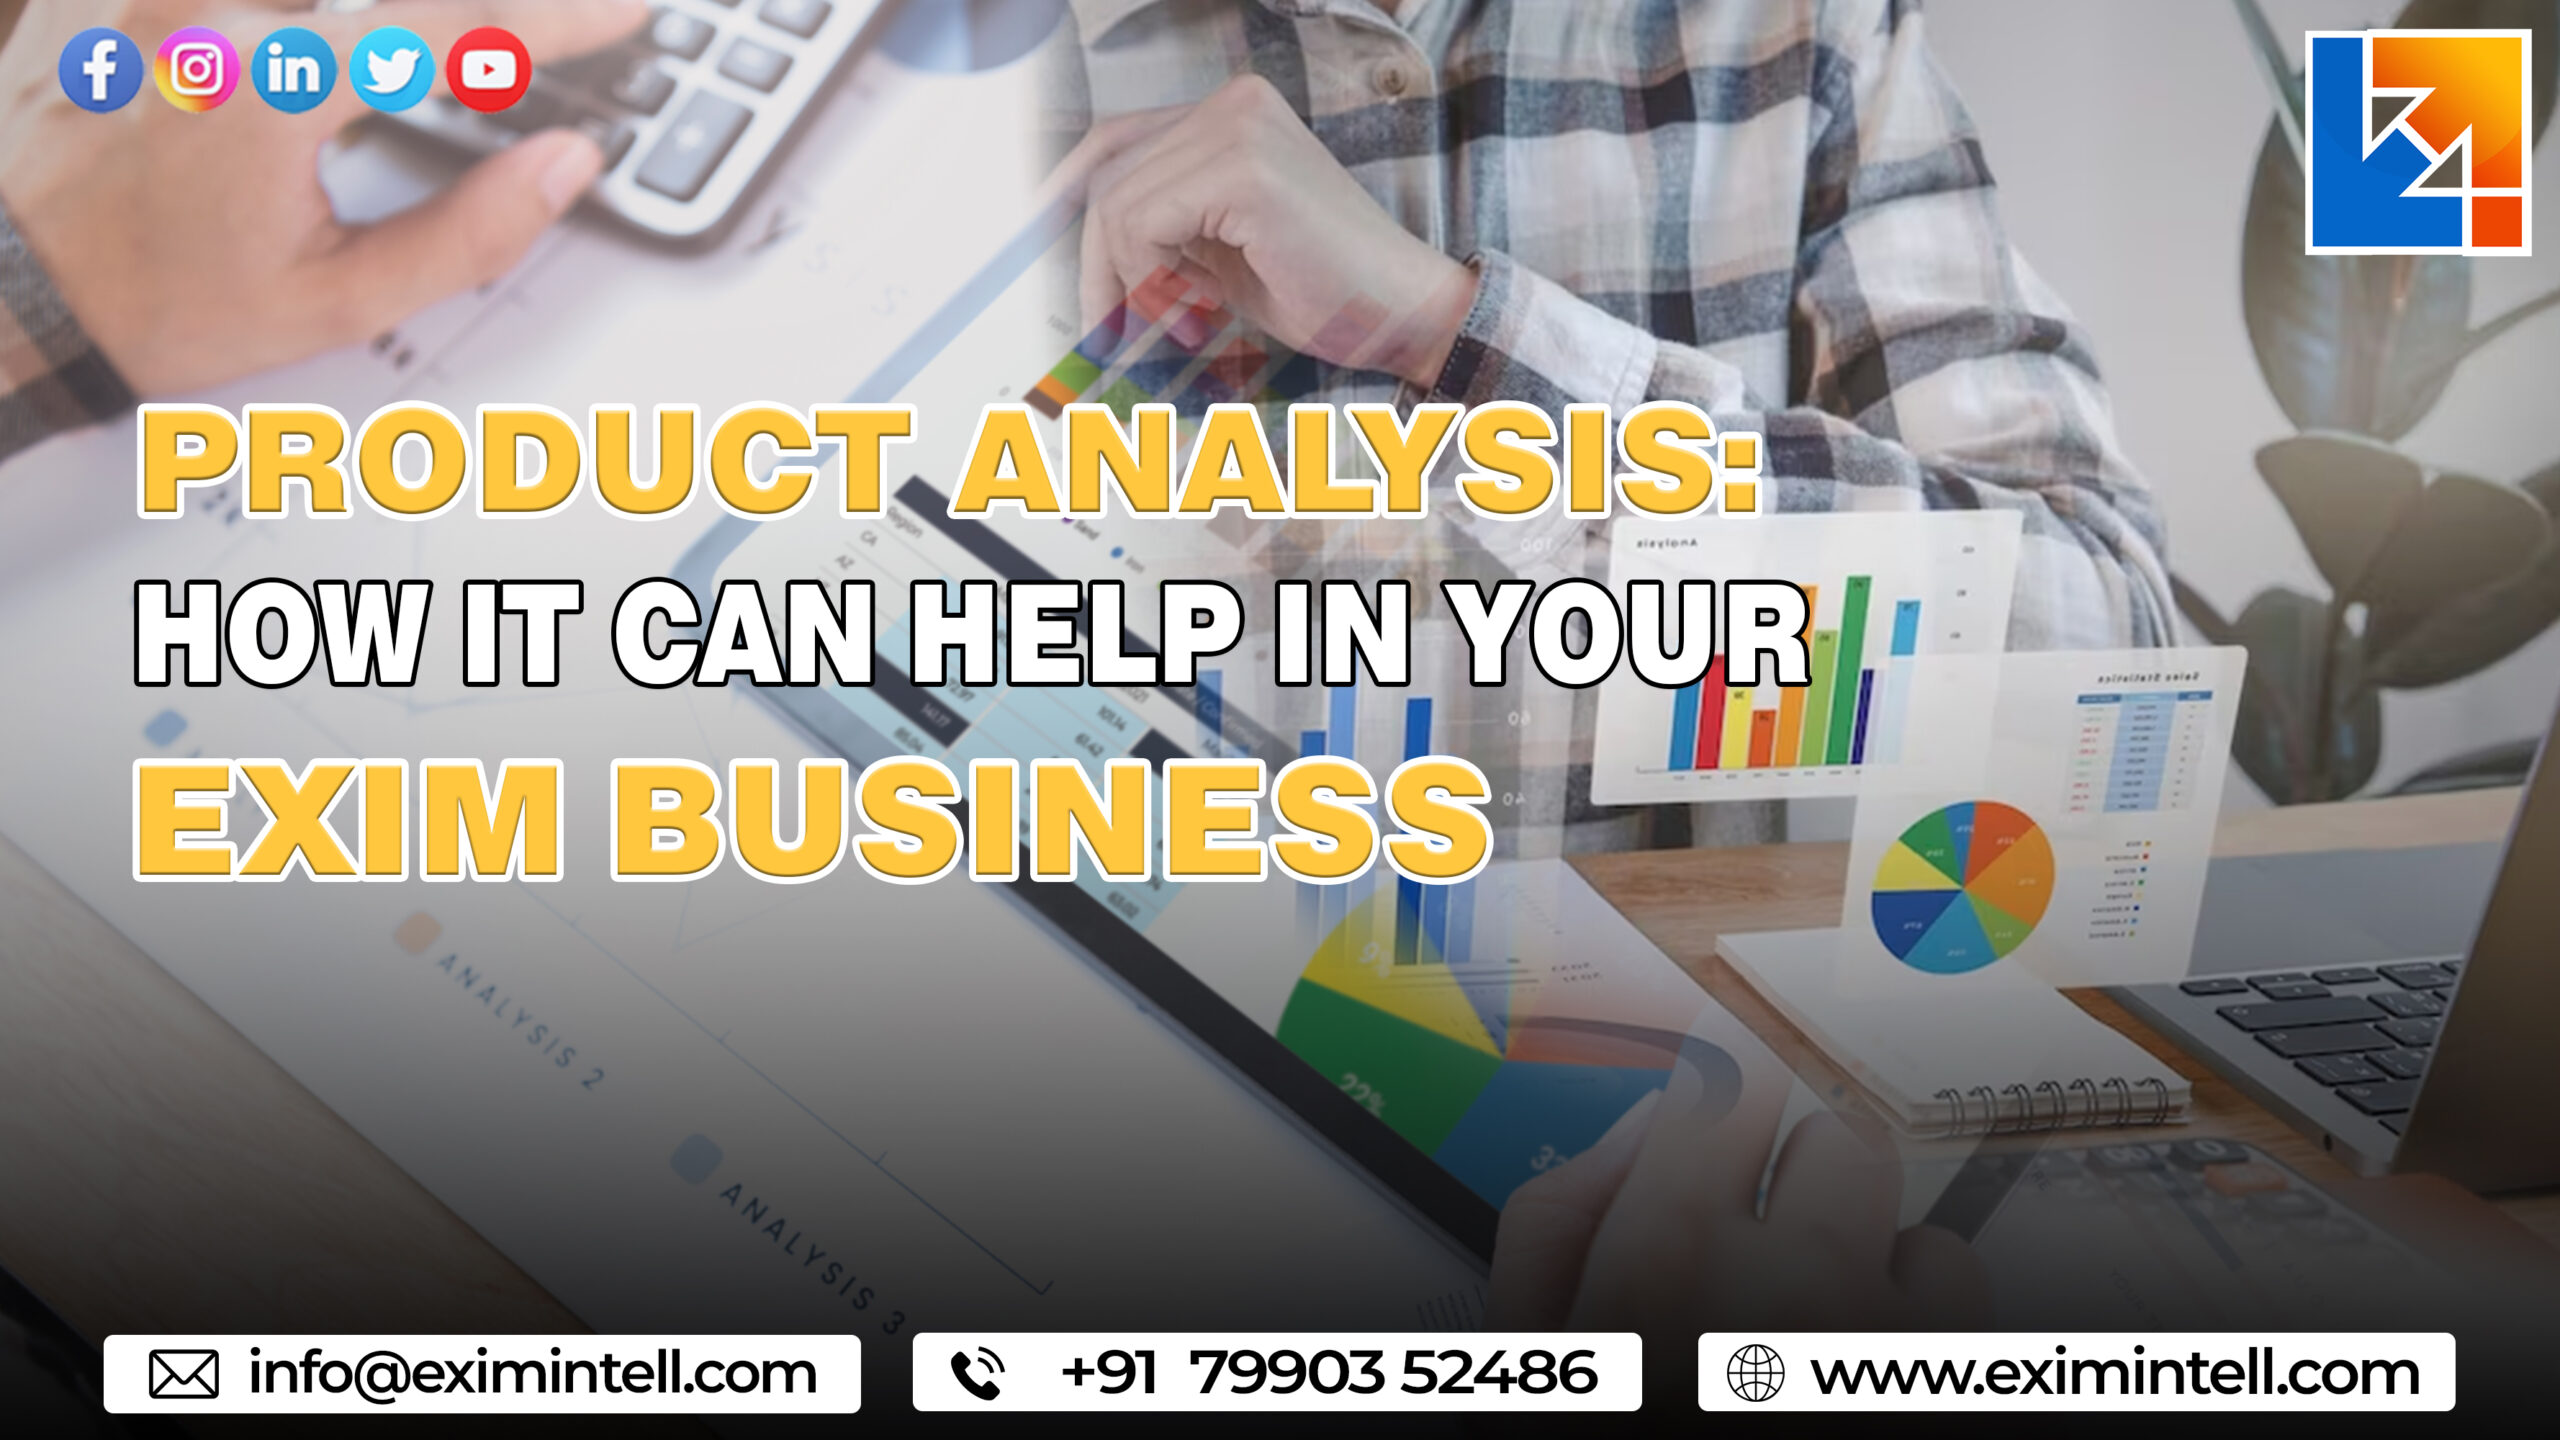 Product Analysis: How It Can Help in Your Exim Business